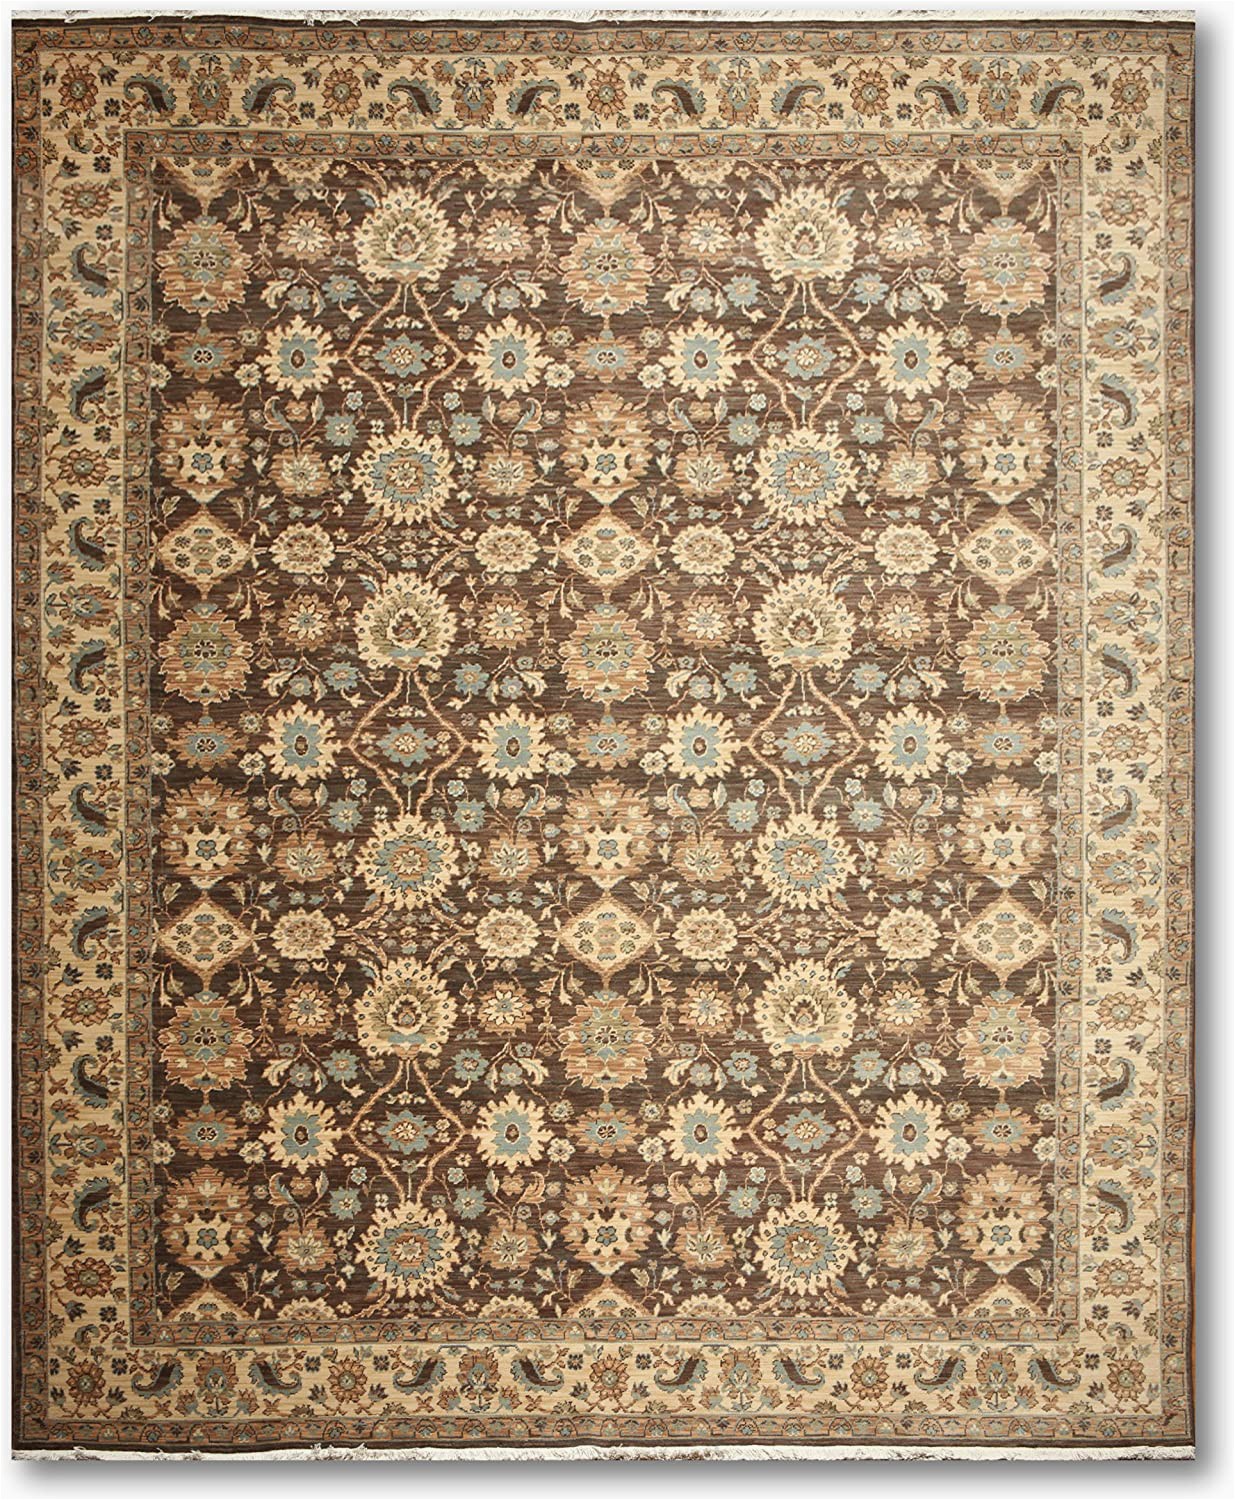 Chocolate Brown and Turquoise area Rugs 9 X12 Gunther Beige Chocolate Brown Turquoise Multi